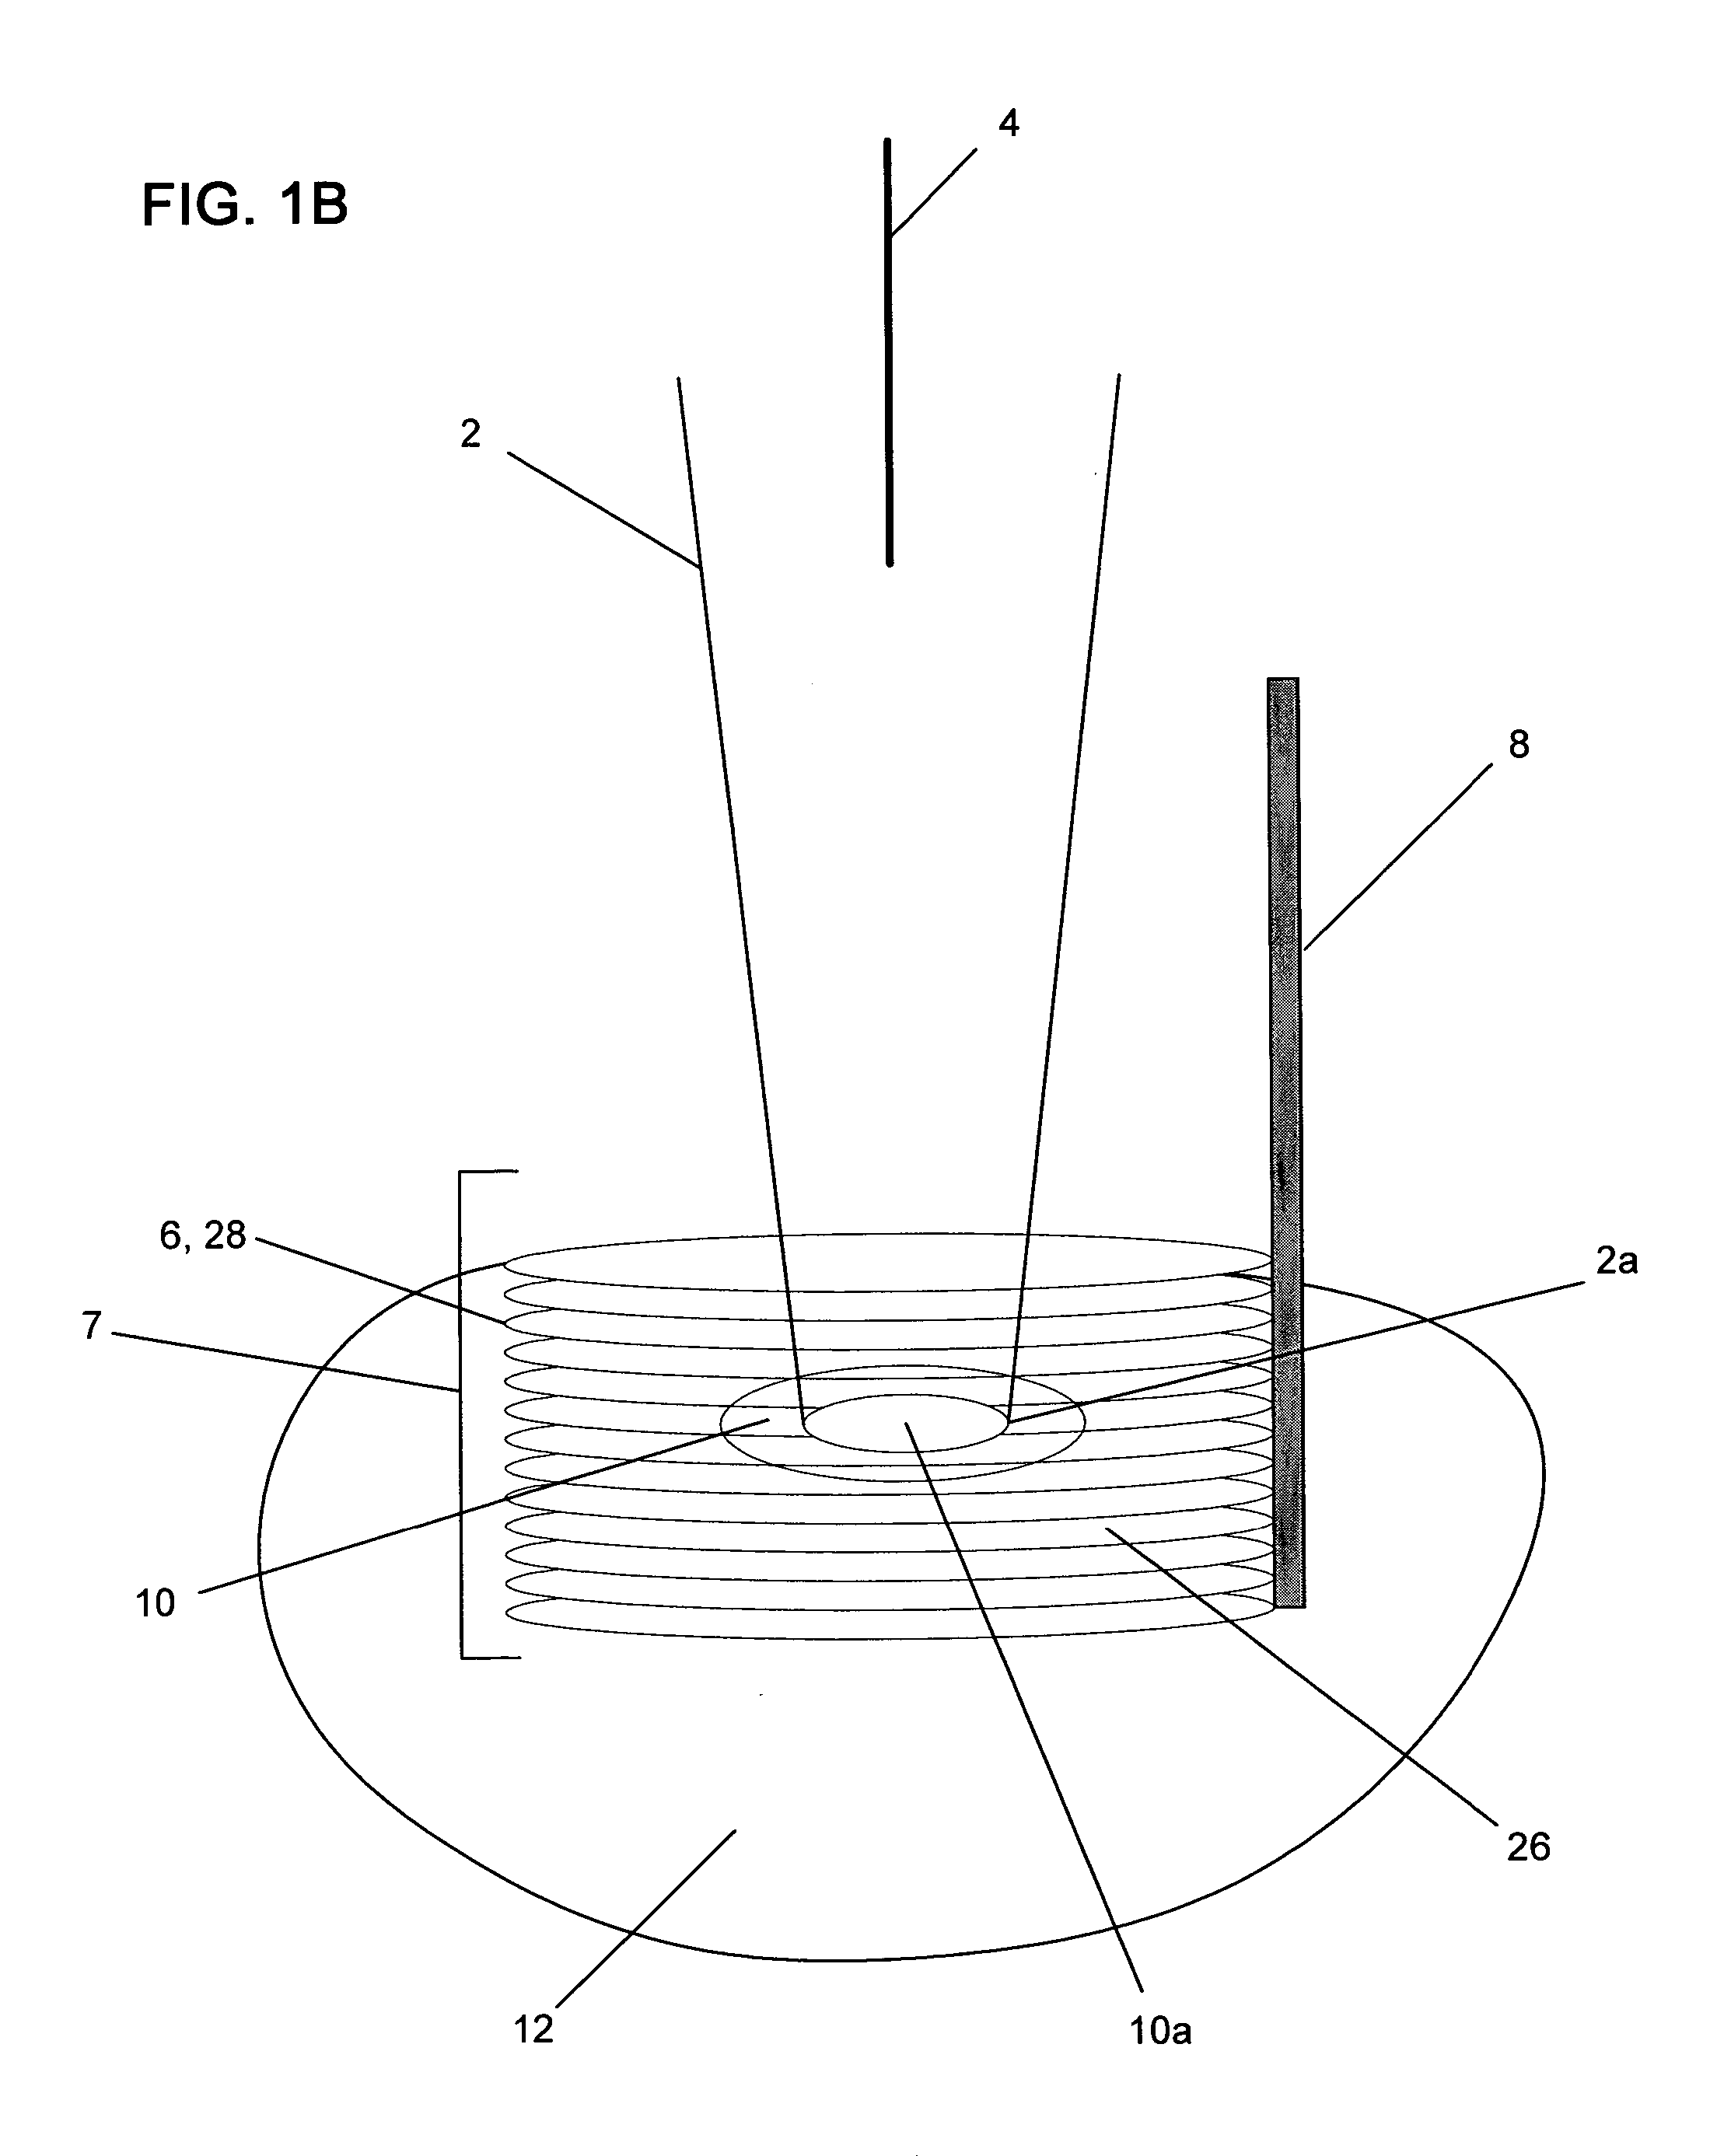 Fast perfusion system and patch clamp technique utilizing an interface chamber system having high throughput and low volume requirements